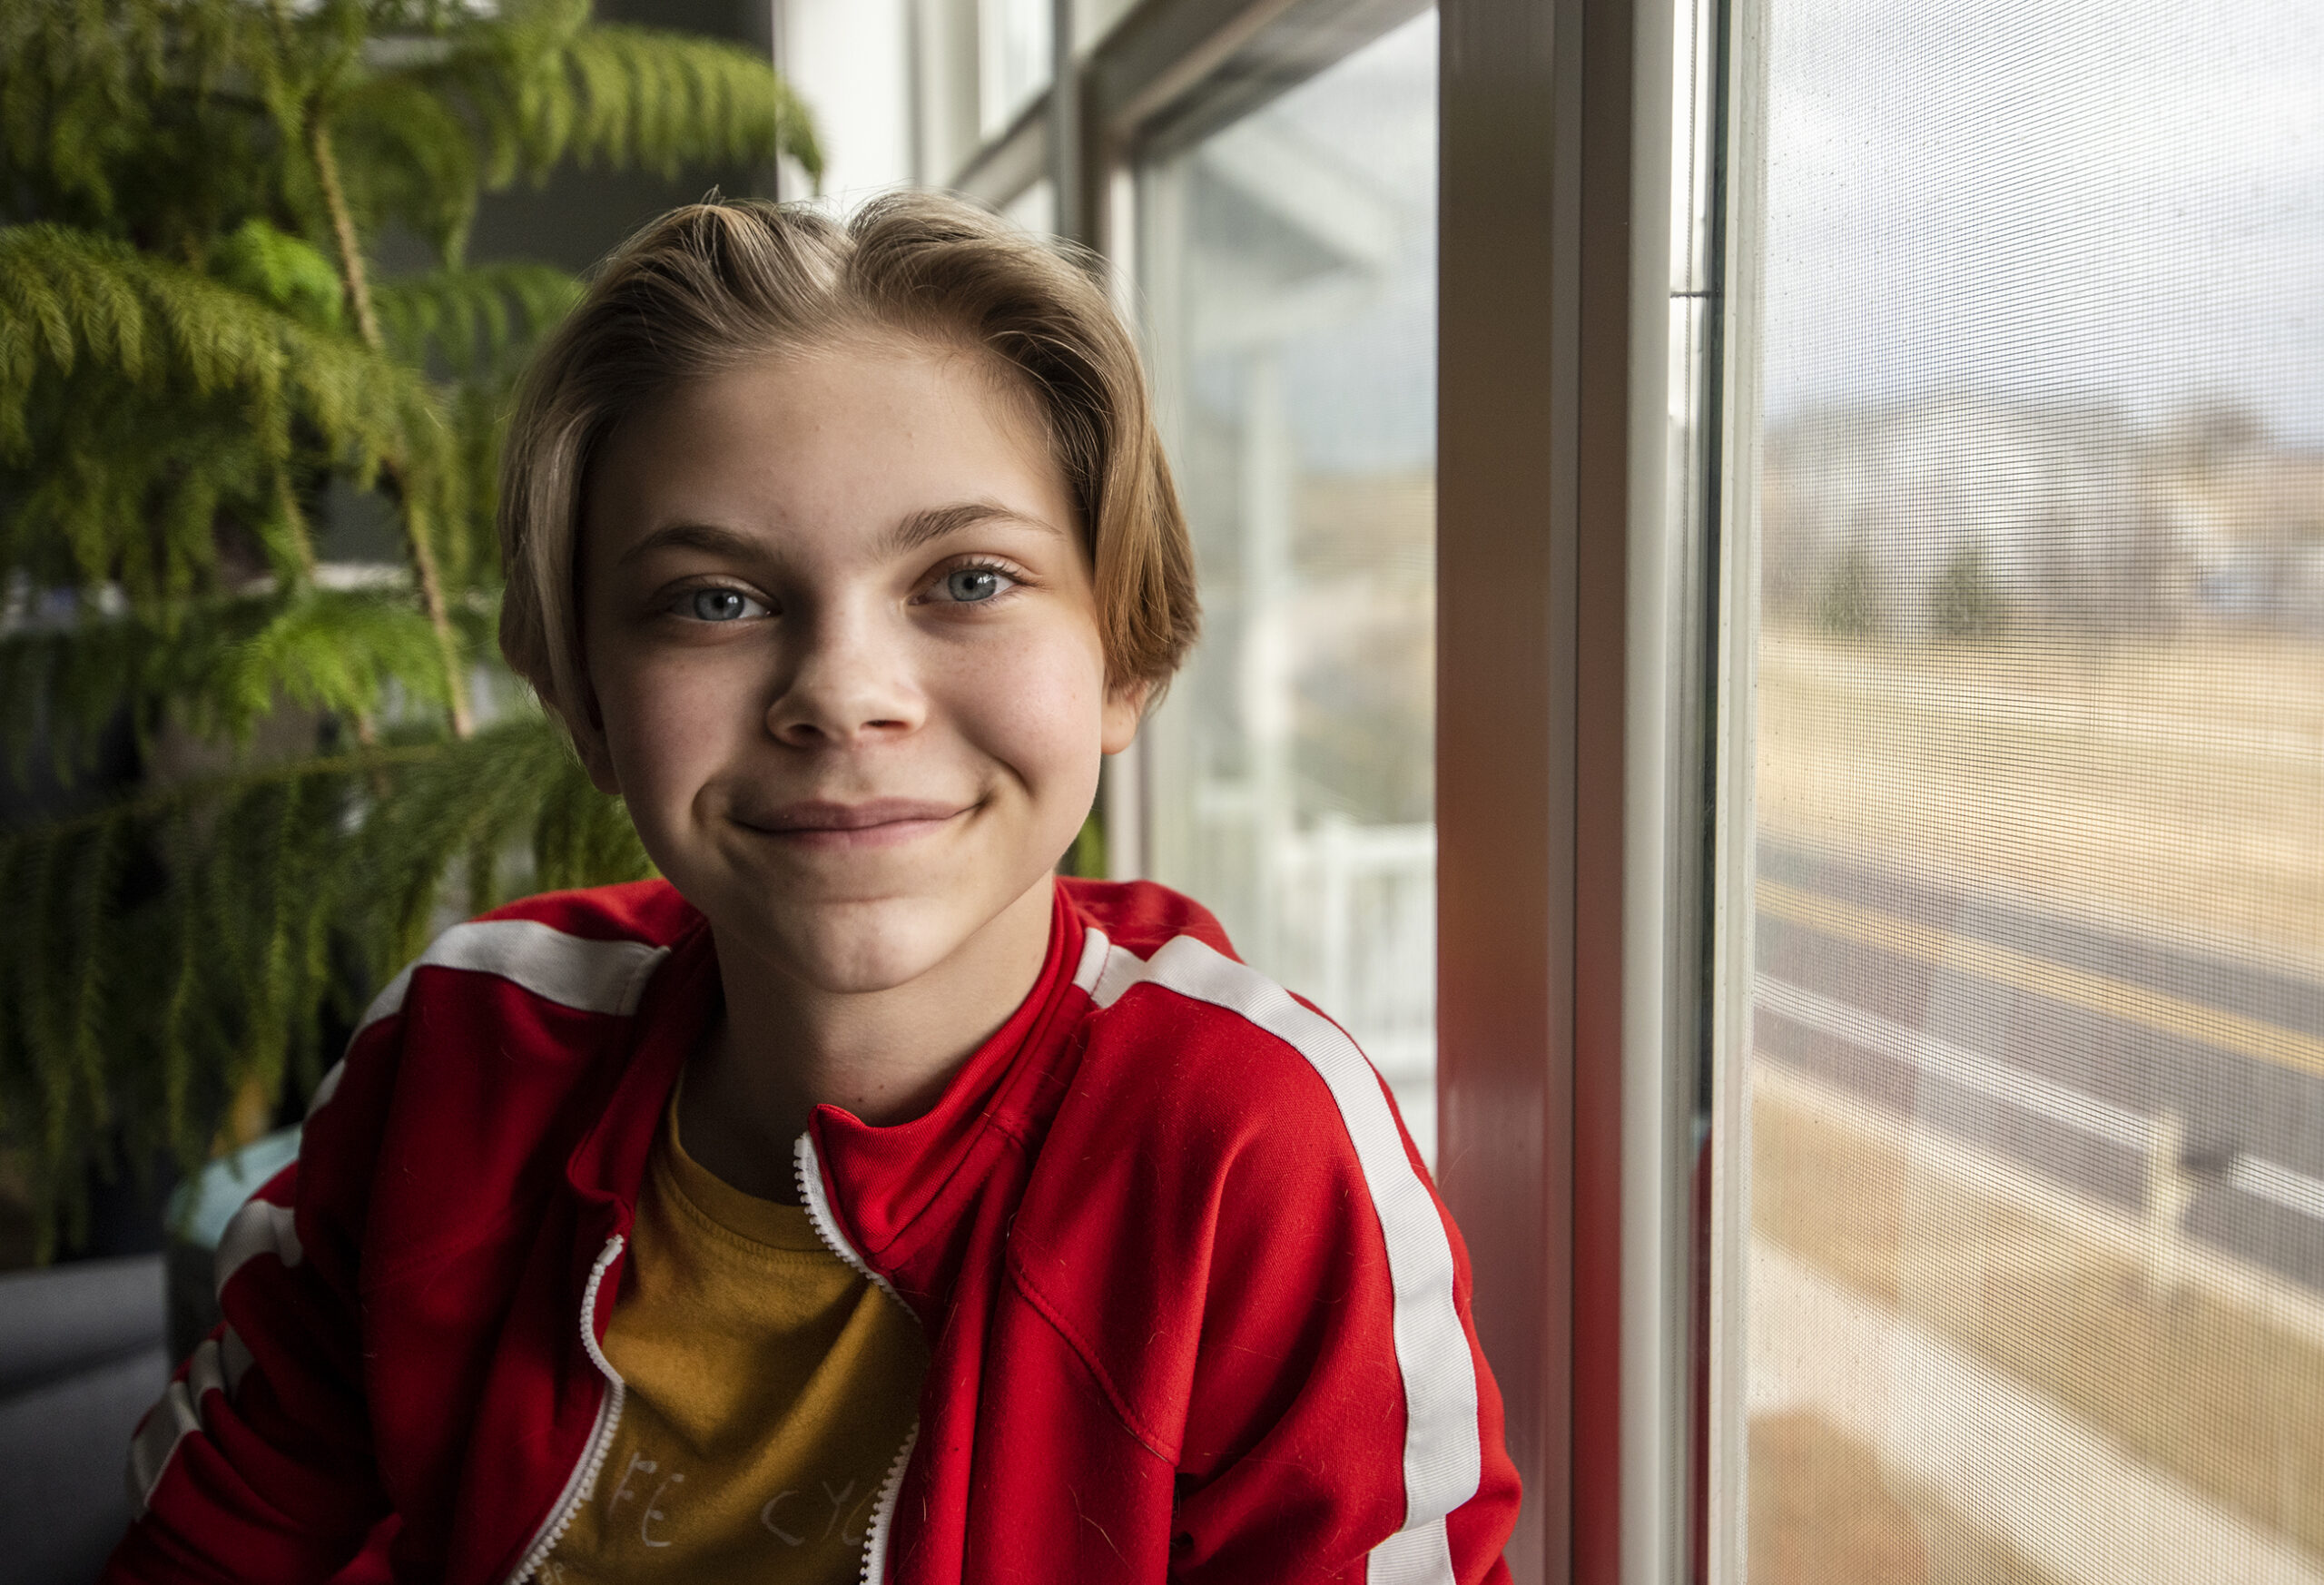 Bailey Mosling smiles while sitting next to a window.